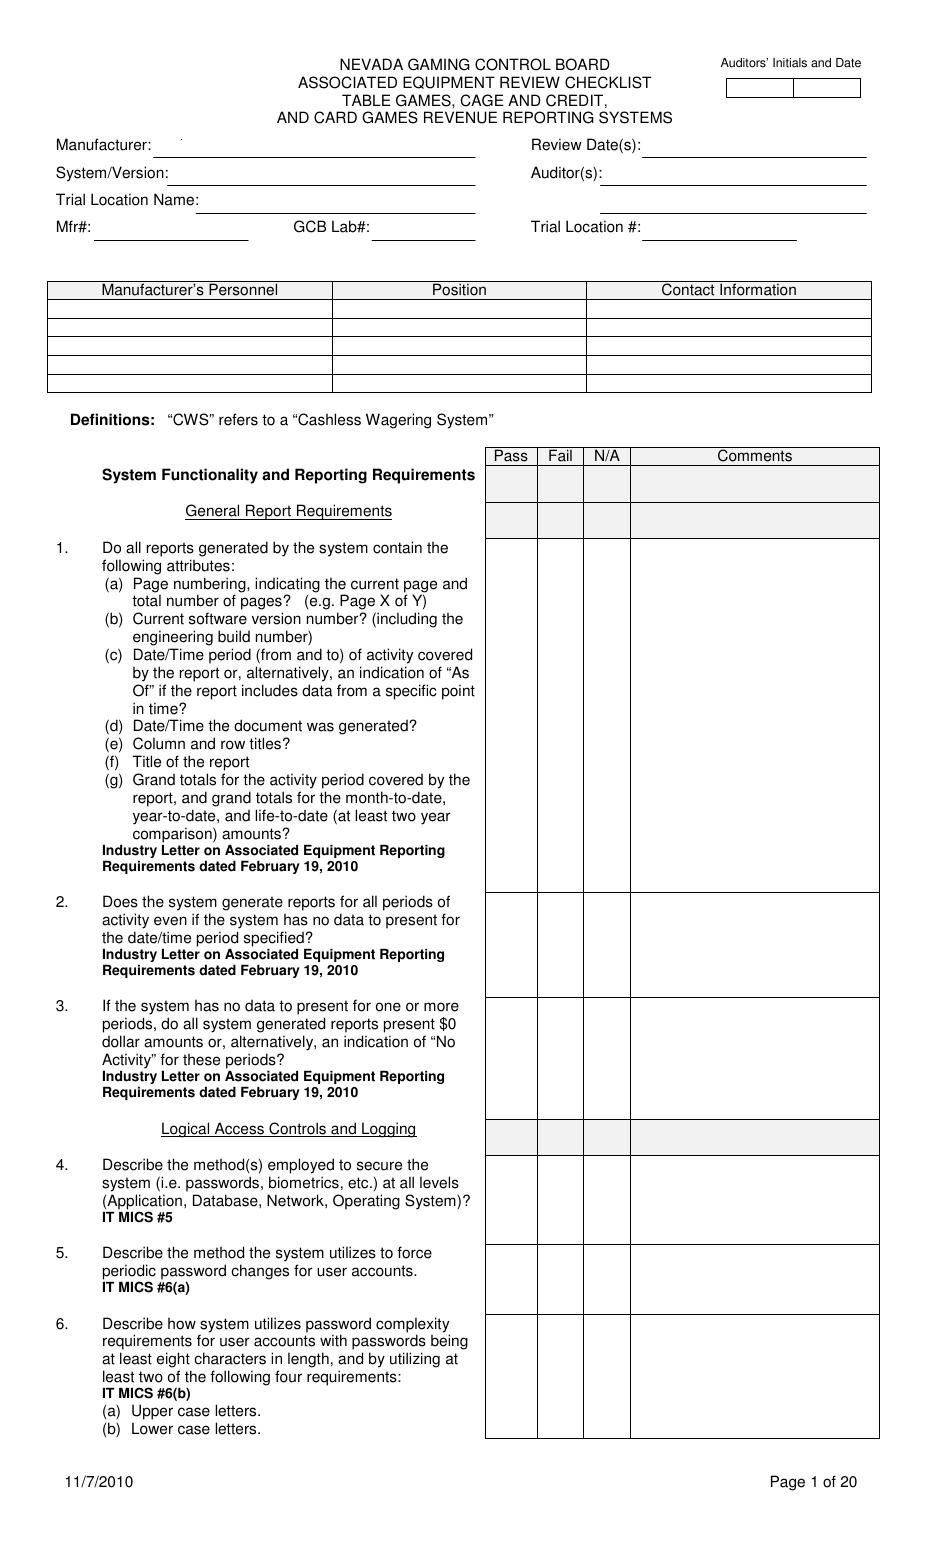 Associated Equipment Review Checklist - Table Games, Cage and Credit, and Card Games Revenue Reporting Systems - Nevada, Page 1